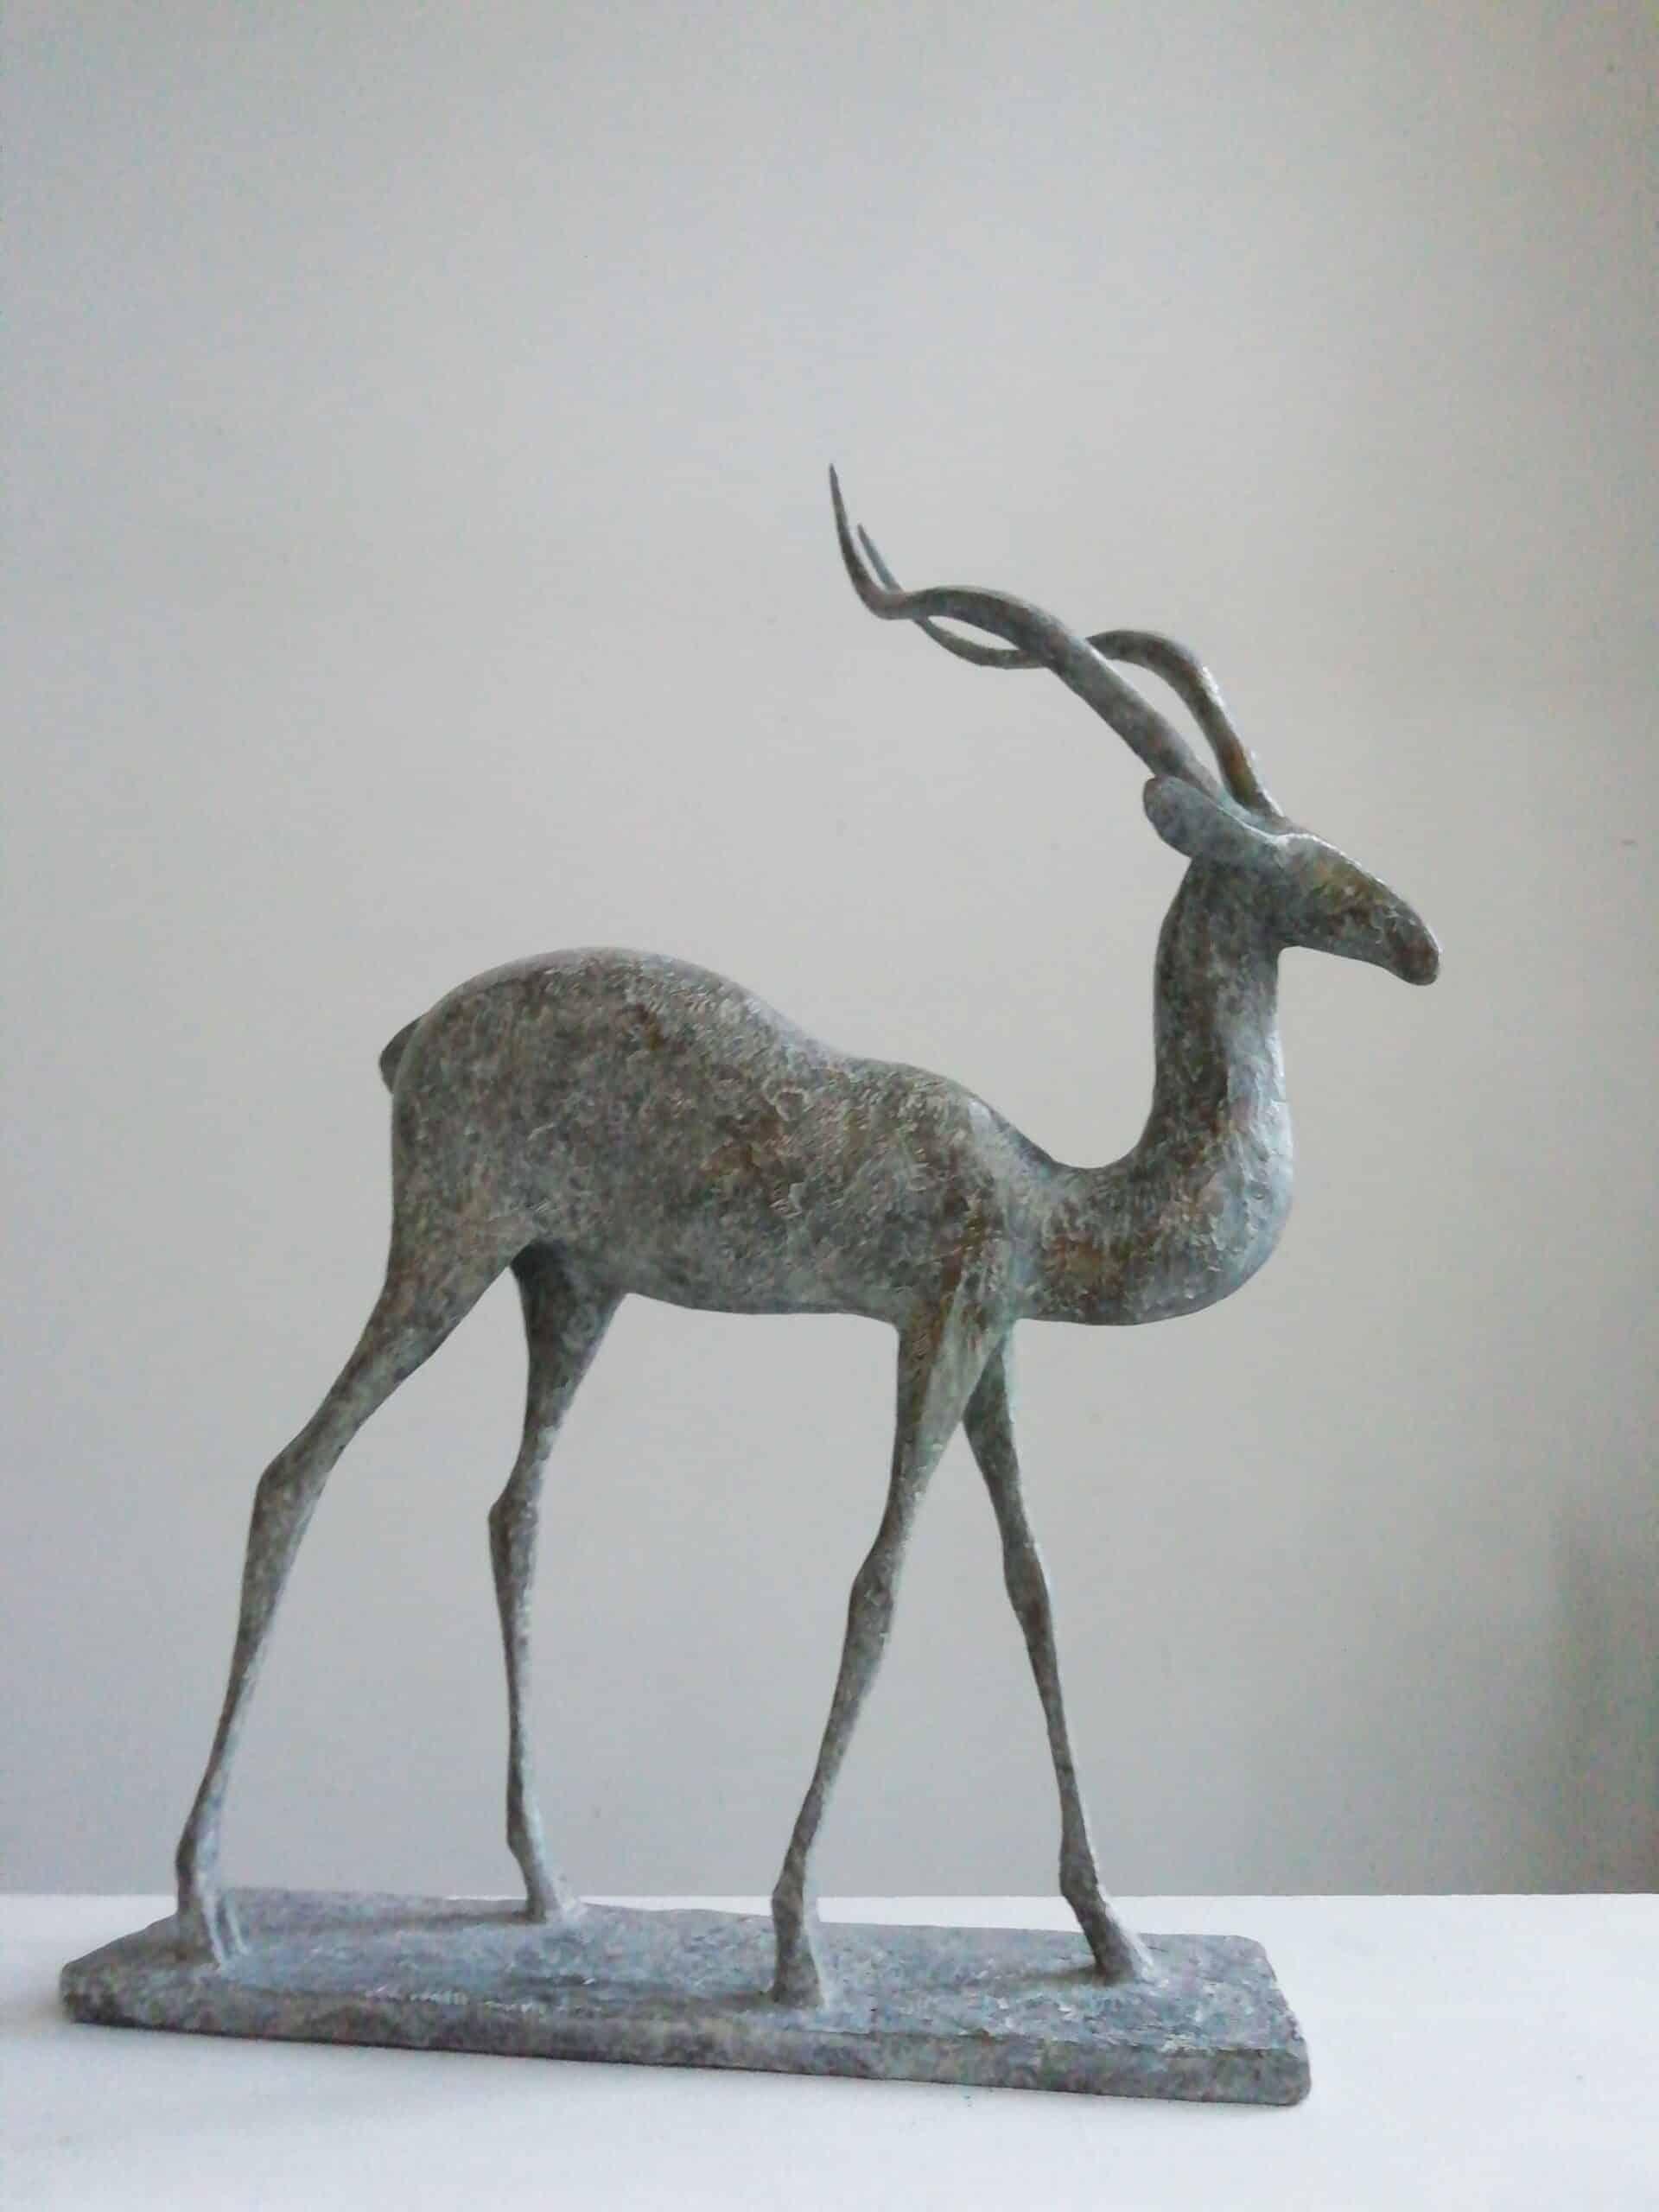 Gazelle V is a bronze sculpture by French contemporary artist Pierre Yermia, dimensions are 59 × 49 × 11 cm (23.2 × 19.3 × 4.3 in). 
The sculpture is signed and numbered, it is part of a limited edition of 8 editions + 4 artist’s proofs, and comes